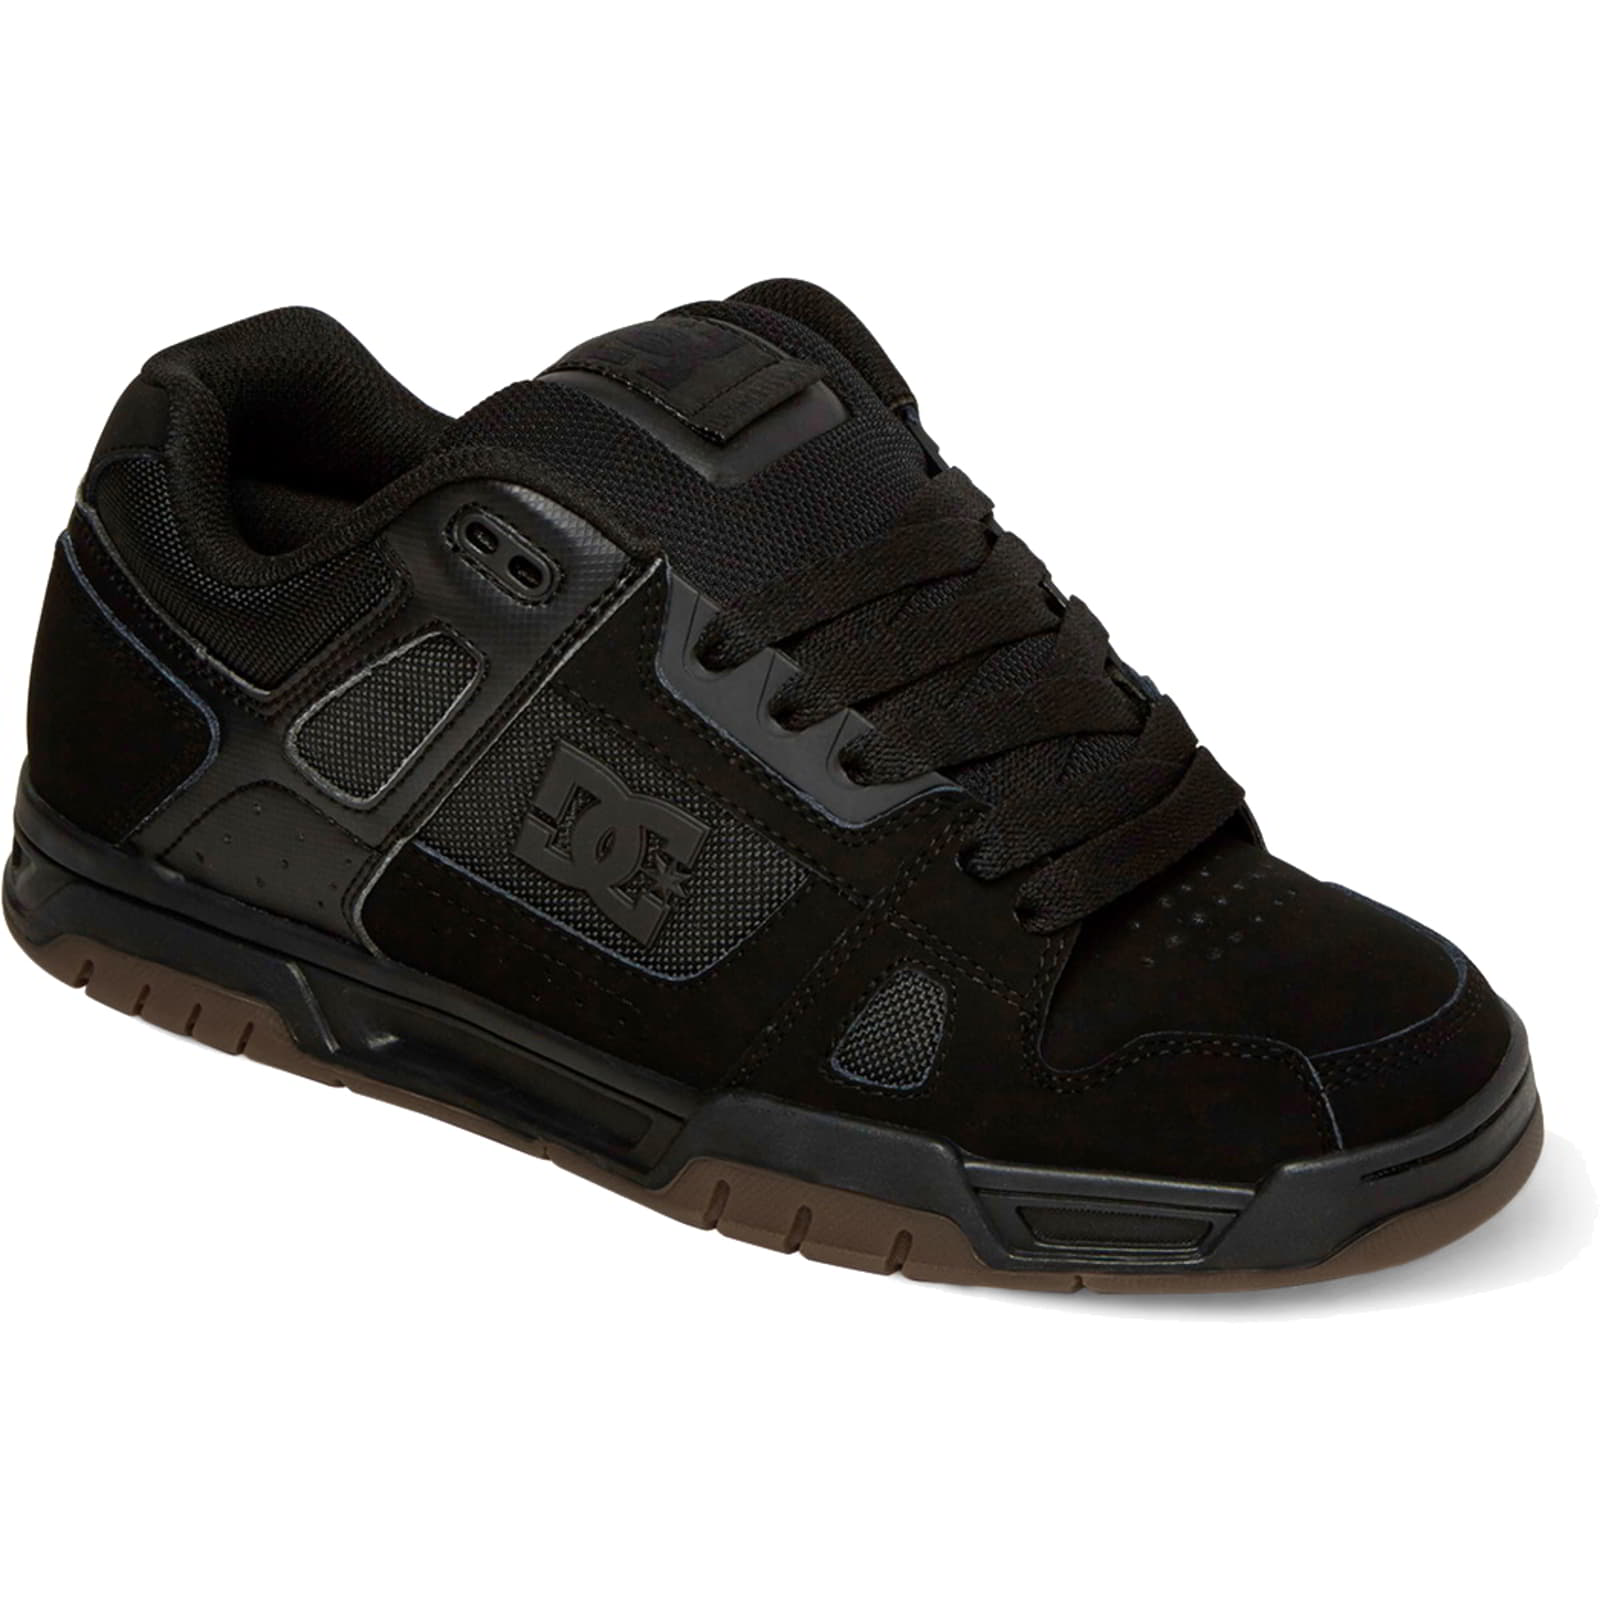 DC Men's Stag Skate Shoes Trainers - UK 9.5 / US 10.5